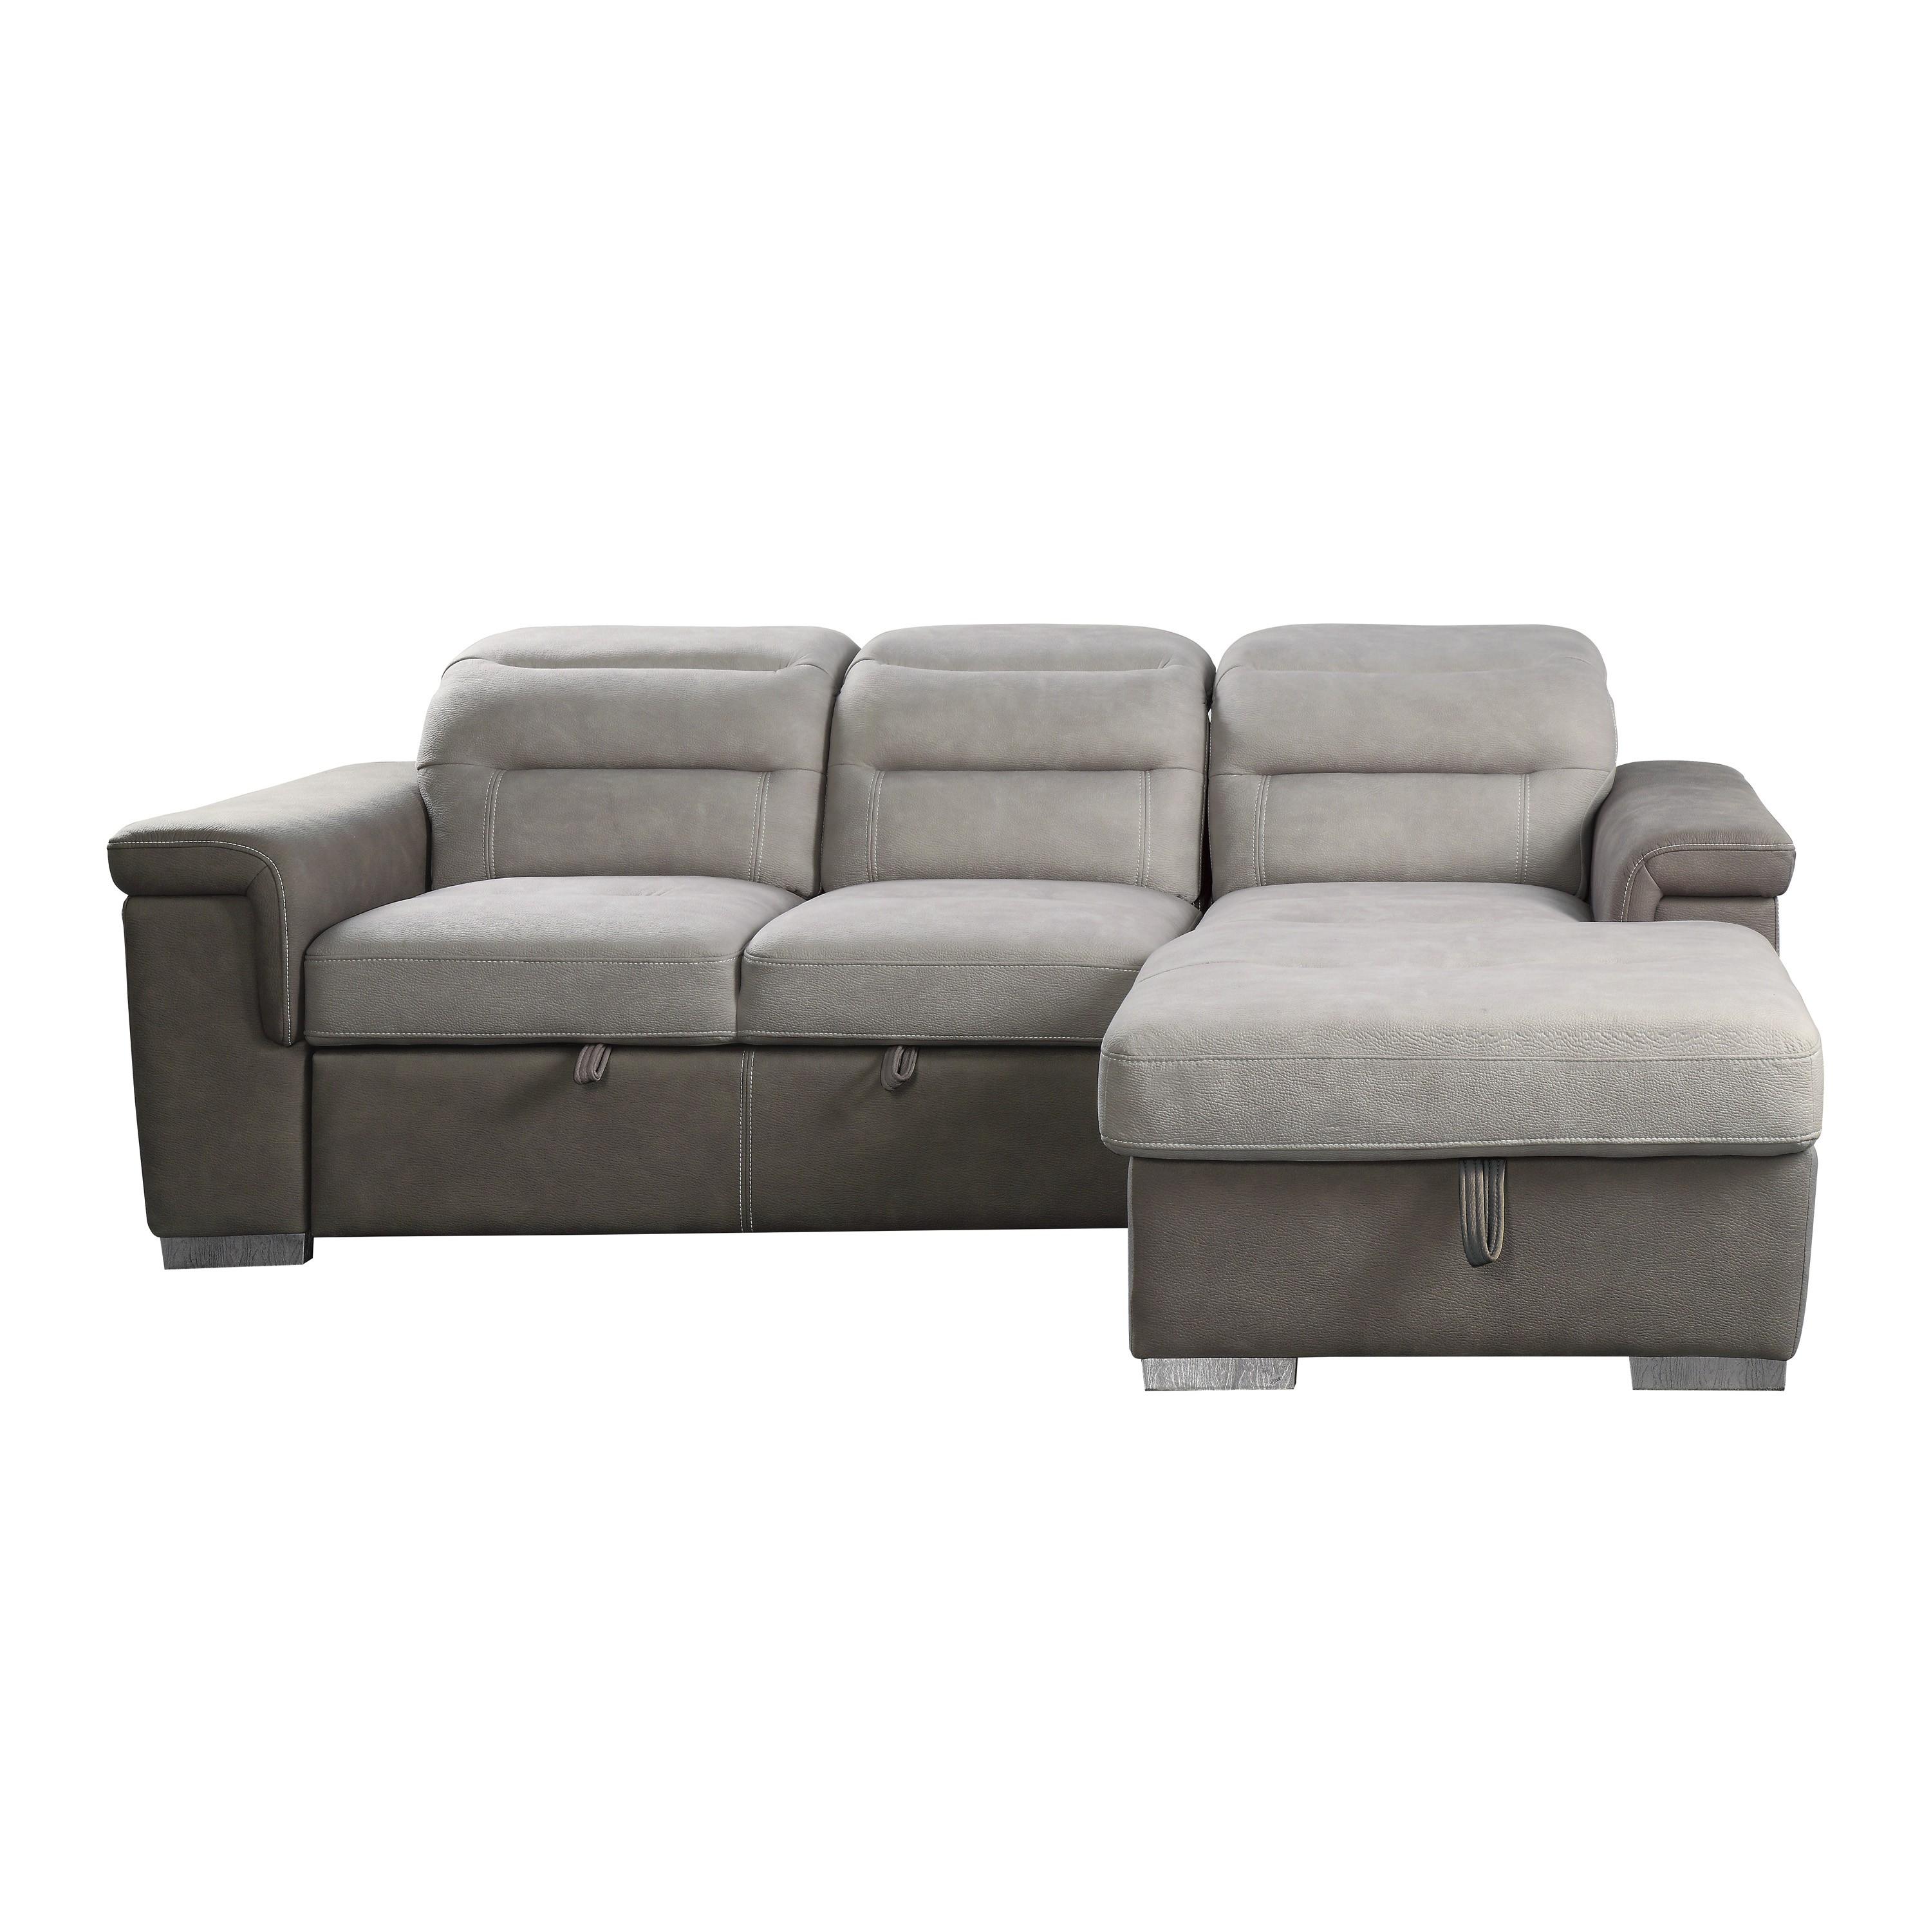 Contemporary Sectional 9808*SC Alfio 9808*SC in Taupe, Beige Microfiber